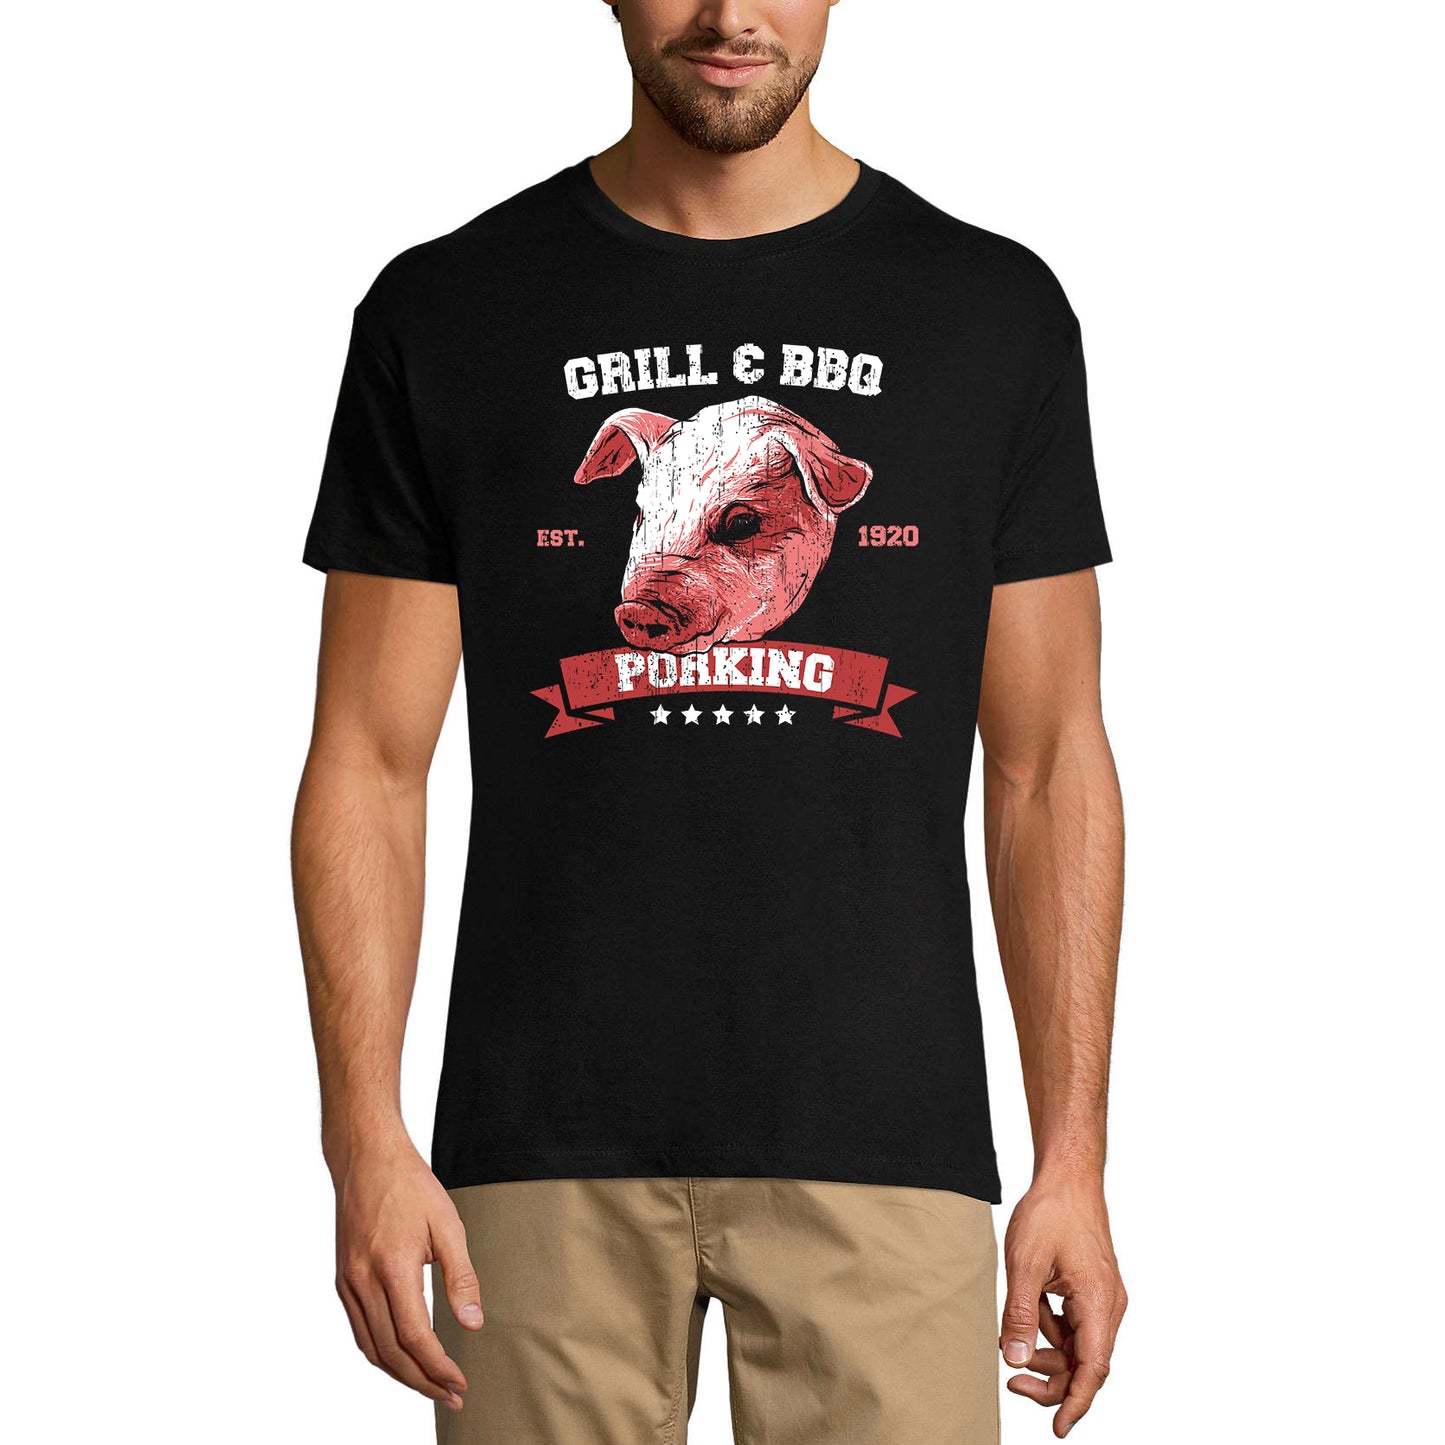 ULTRABASIC T-shirt graphique pour hommes Grill and BBQ Porking - Chemise barbecue pour hommes